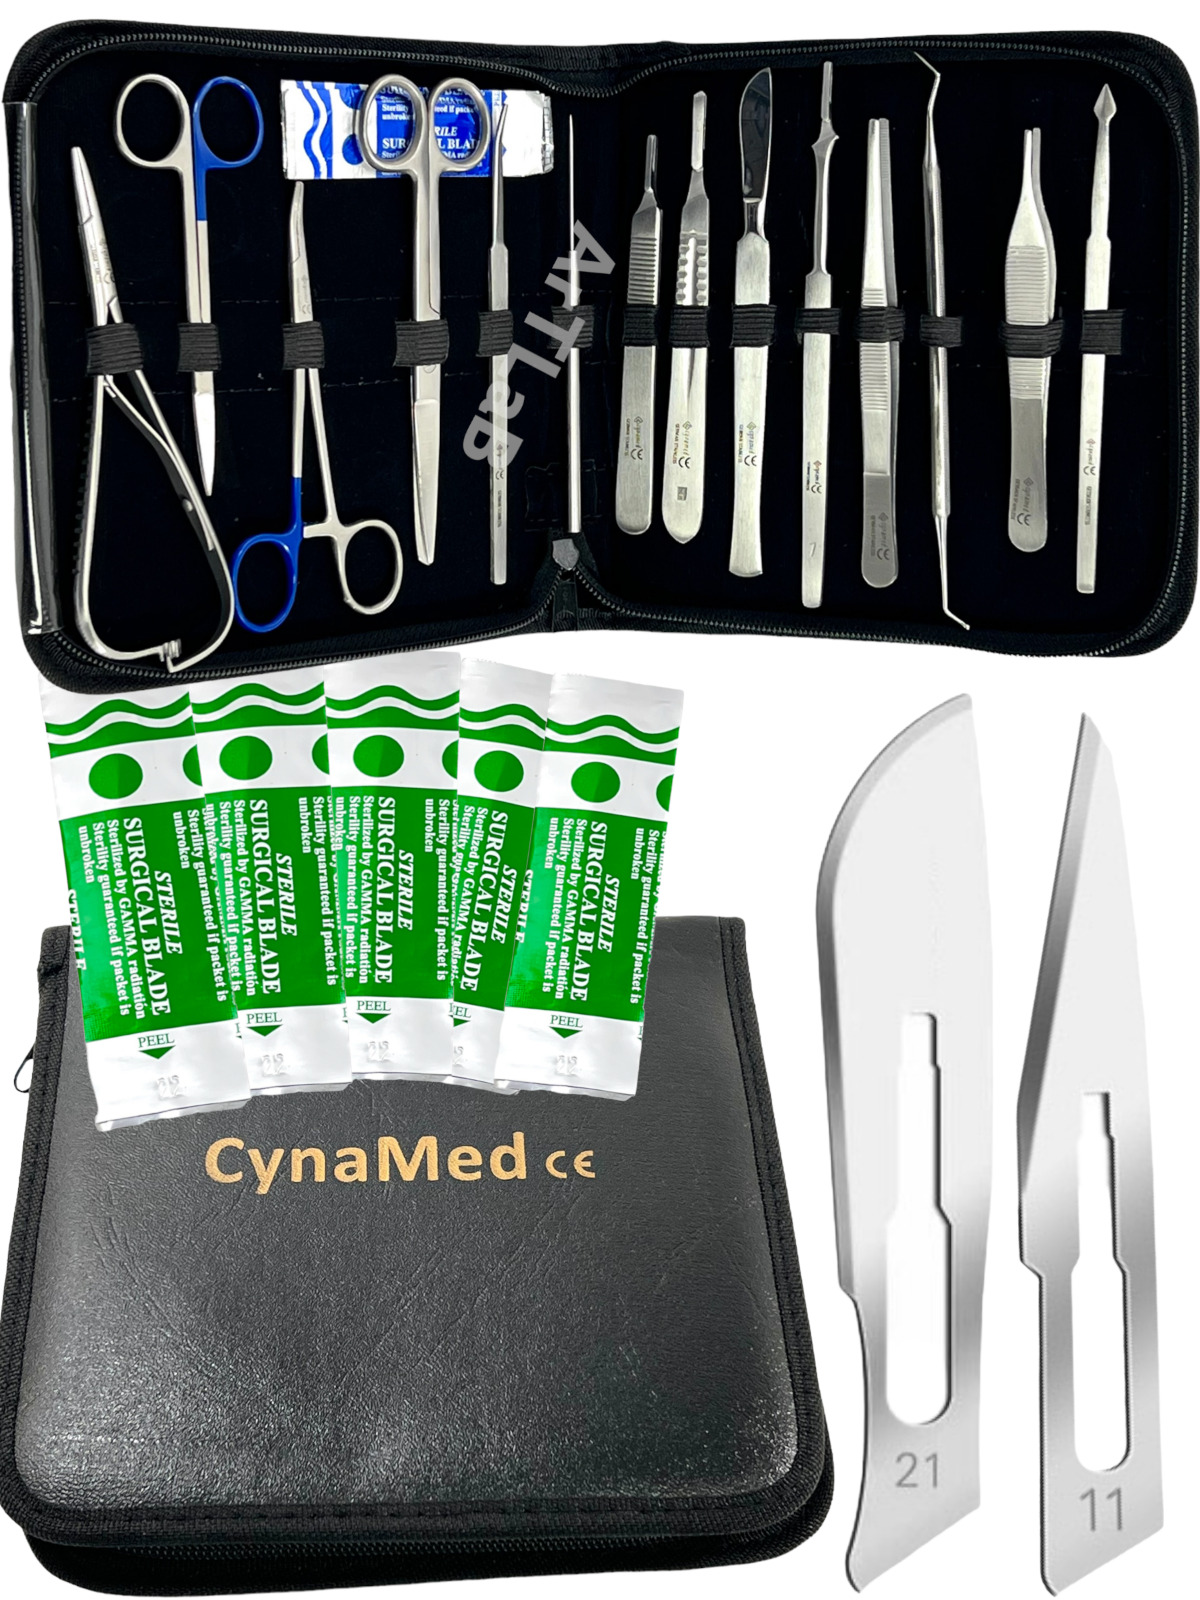 New 34 pcs Minor Surgery Set with Case Surgical Instruments Kit Stainless Steel